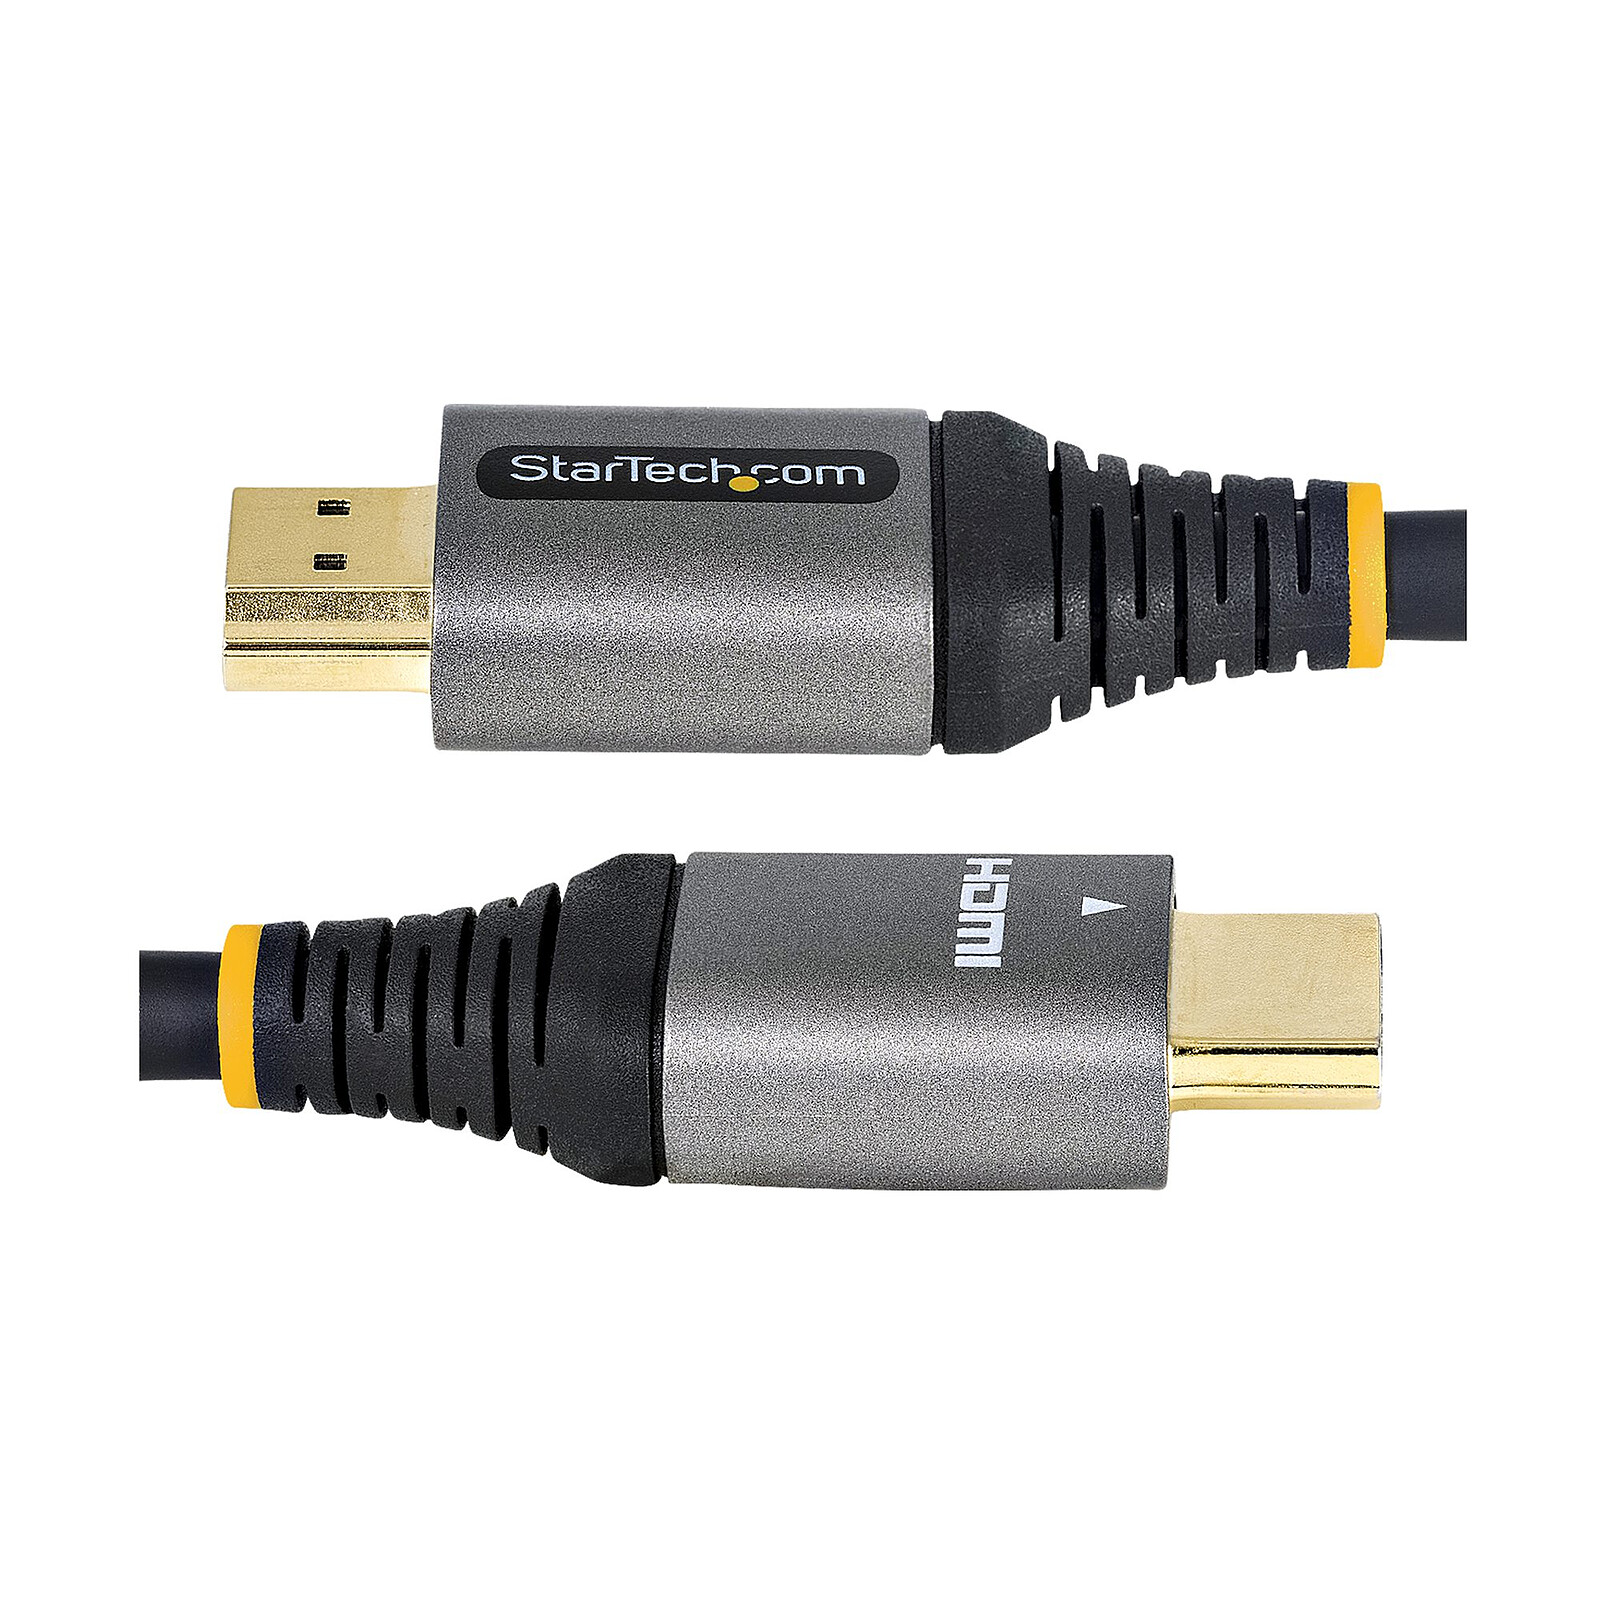 Buy Wholesale China Certified Hdmi 2.1 Cable Ultra 48gbps Hdmi Cable 4k 8k  60hz 120hz Resolution Hdr Tdr Hdmi Cable 300 & Hdmi Cable at USD 2.94